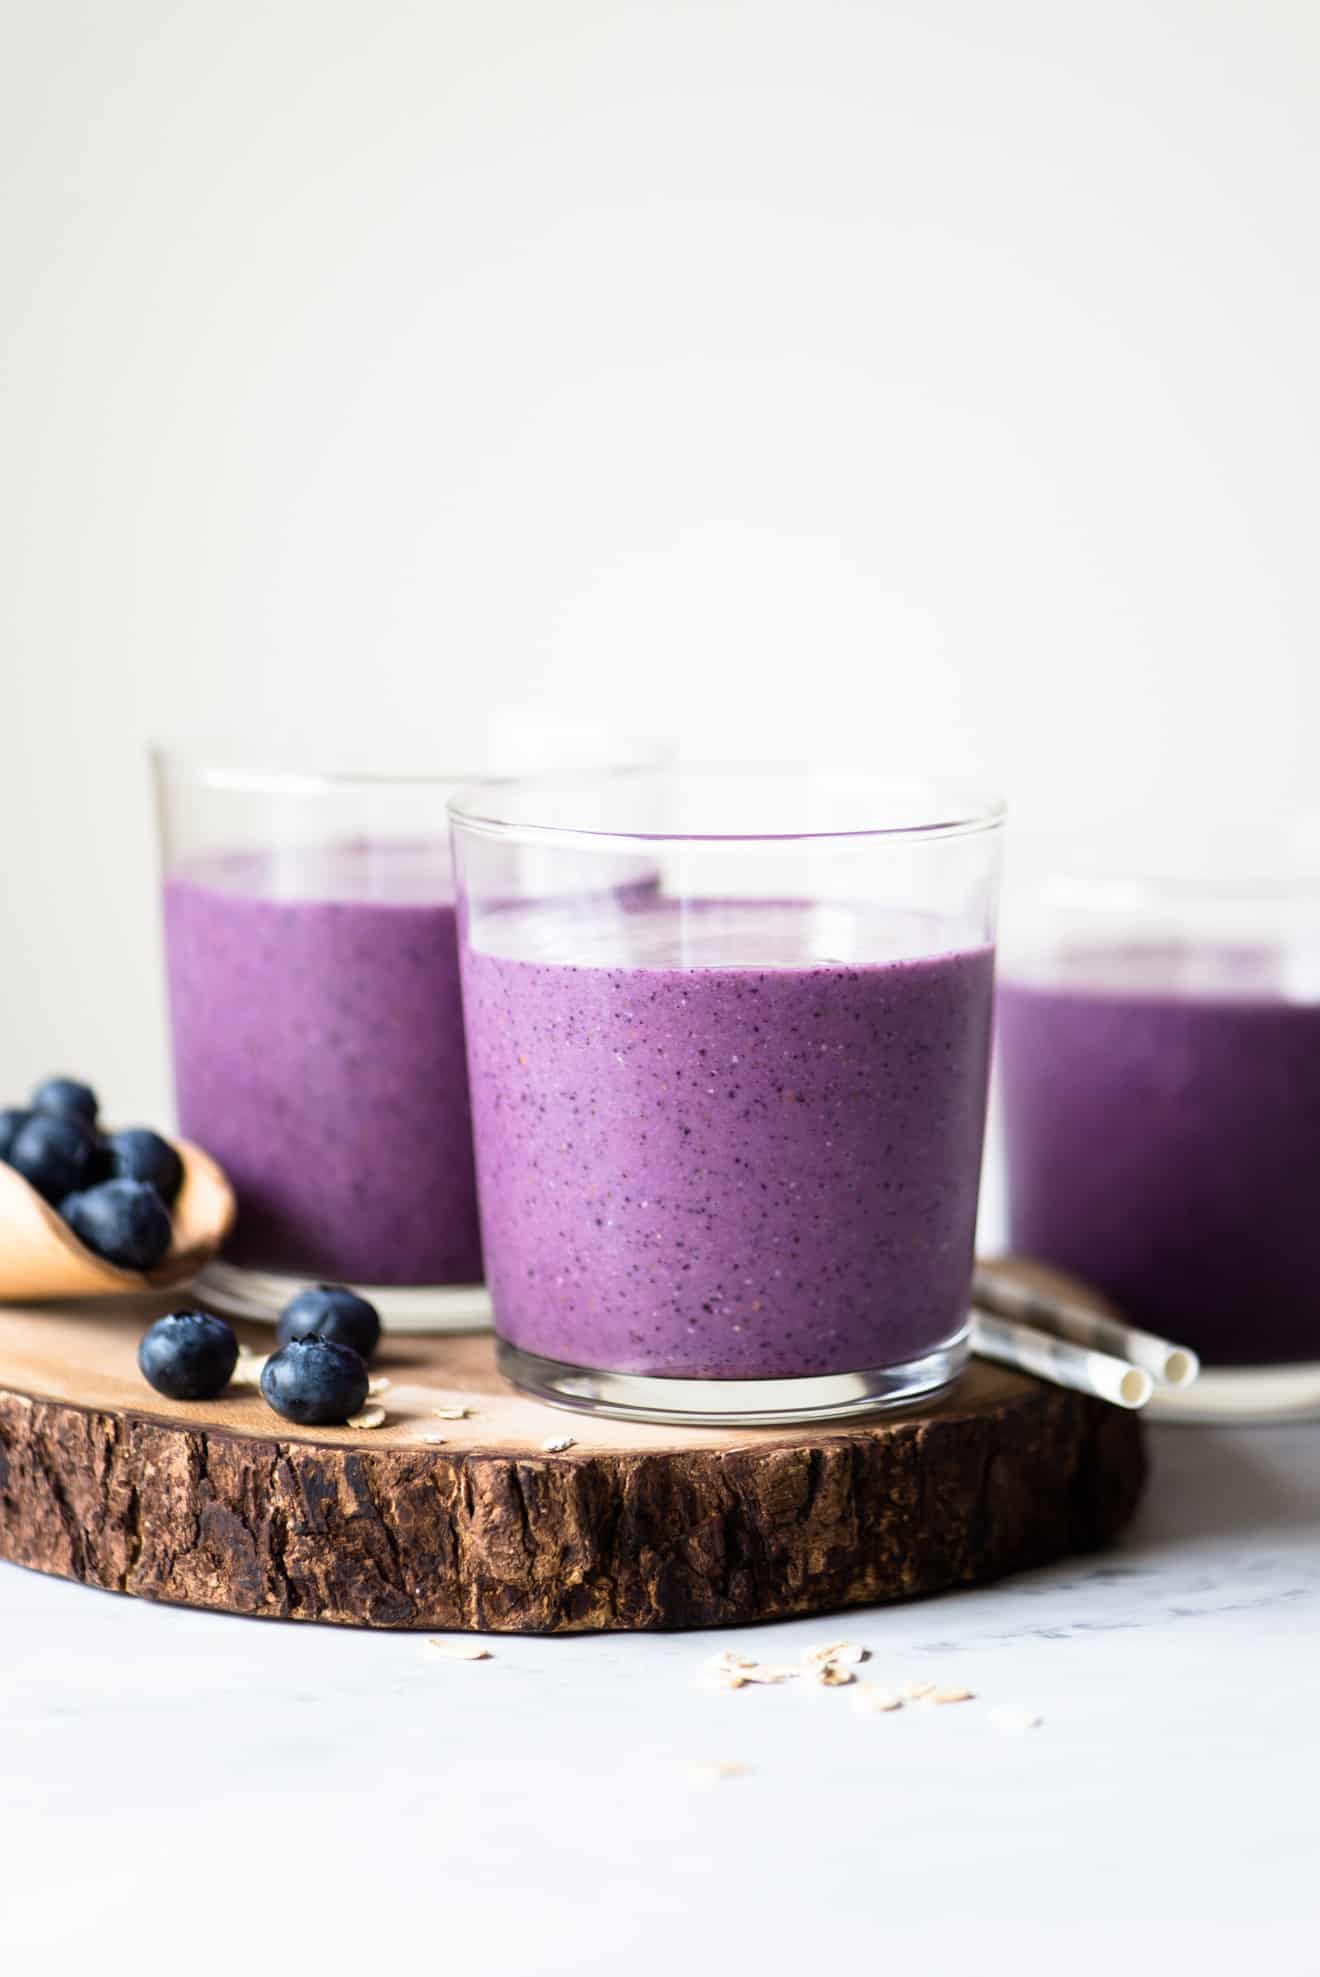 Easy Blueberry Smoothie - simple, satisfying smoothie made with just a few ingredients!